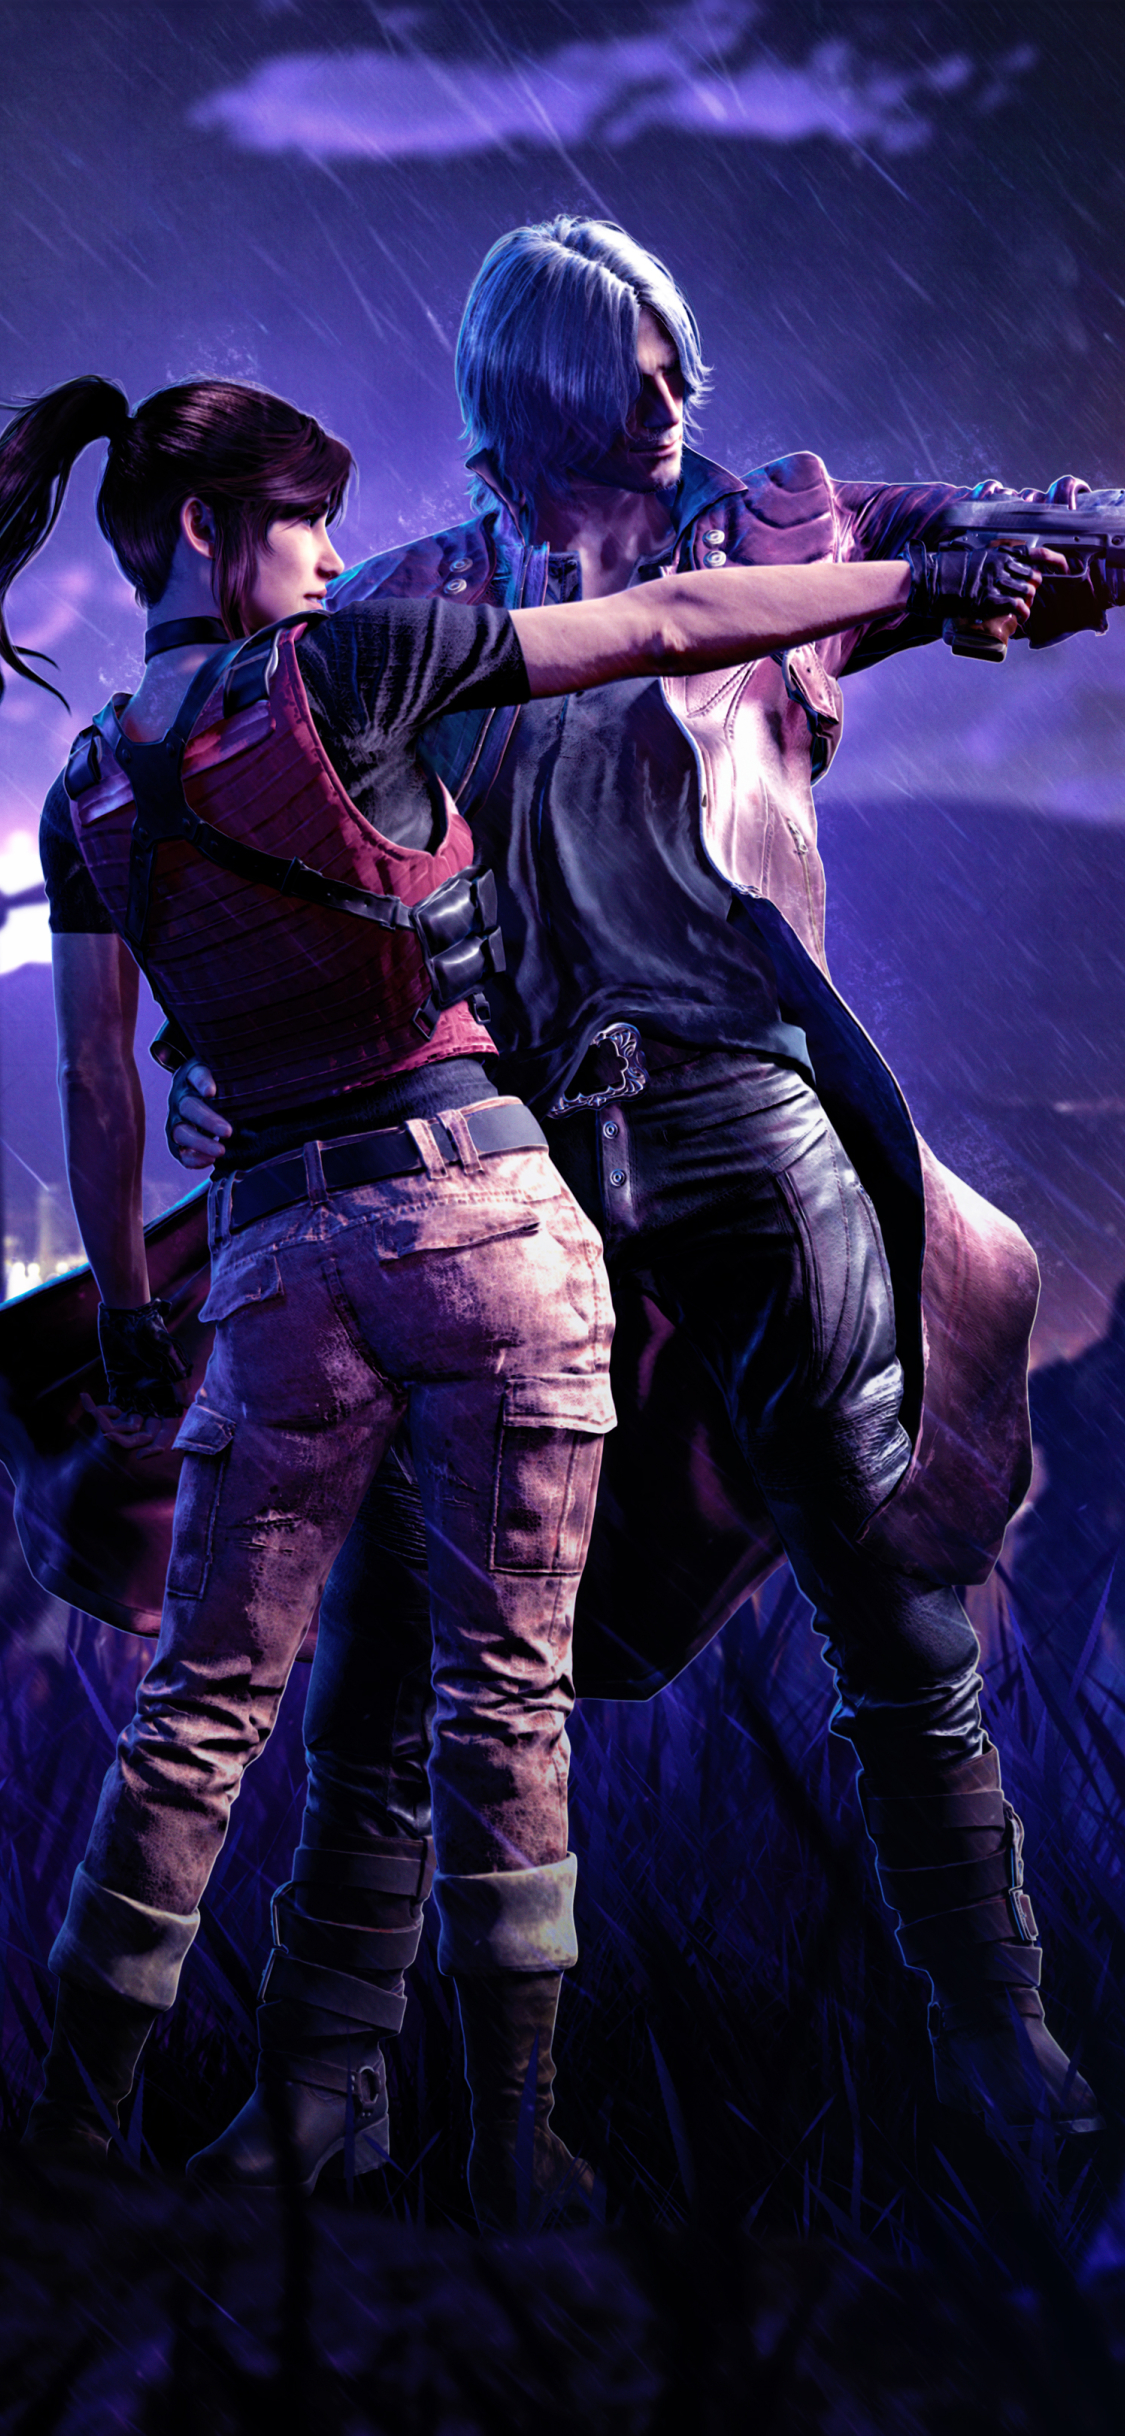 1125x2436 5K Resident Evil Devil May Cry 5 Iphone XS,Iphone 10,Iphone X Wallpaper, HD Games 4K ...